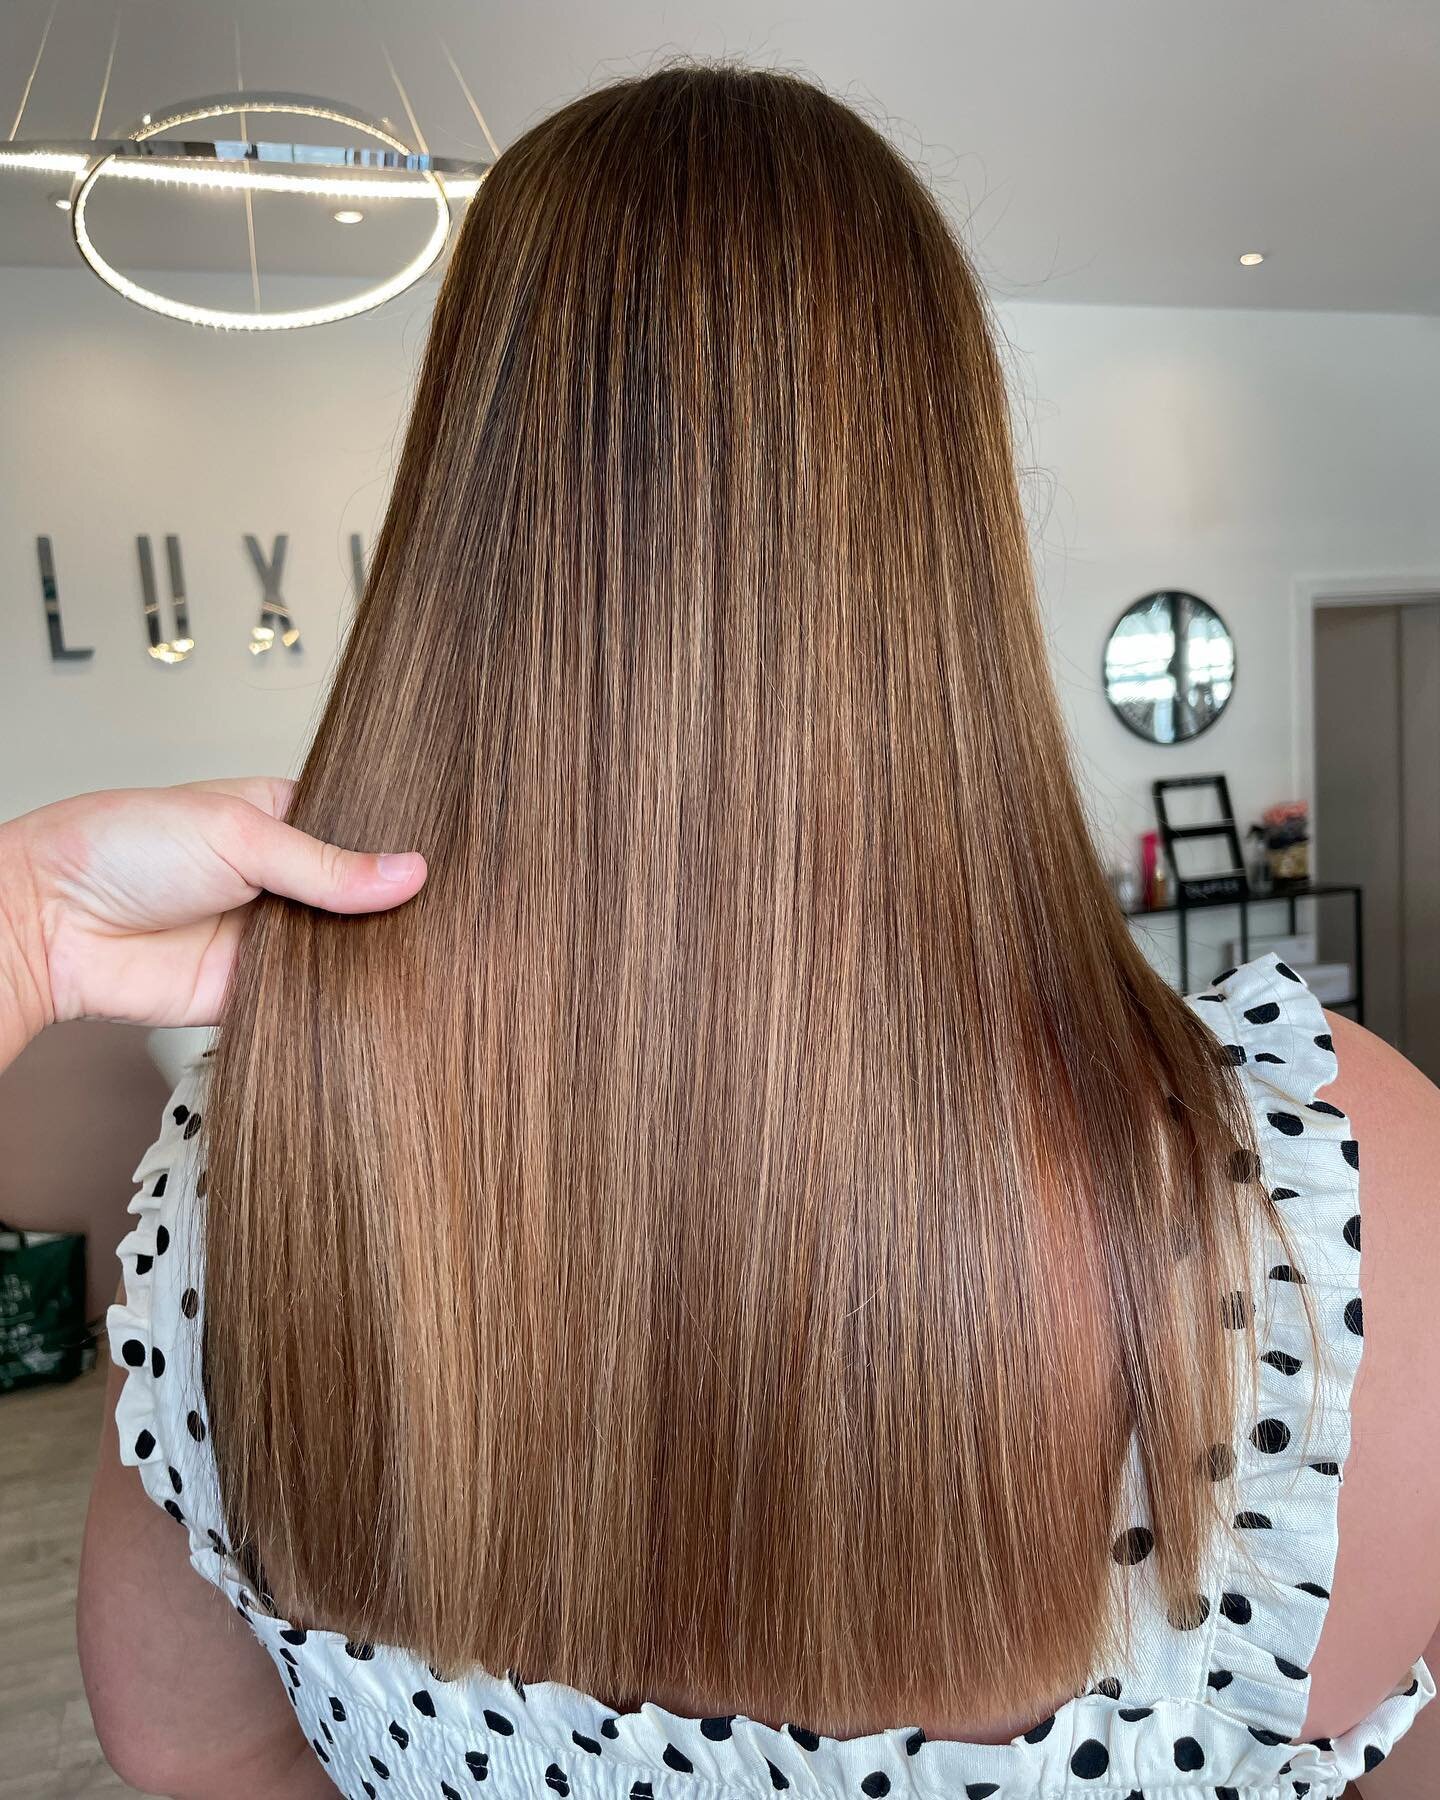 This was a challenge 👏🏼

We had a natural root of an inch, an inch of a warm dark tint, another two to three inches of a super dark tint and warm ends with over processed bleach pieces&hellip;

This is appointment number one and was a Balayage Tran